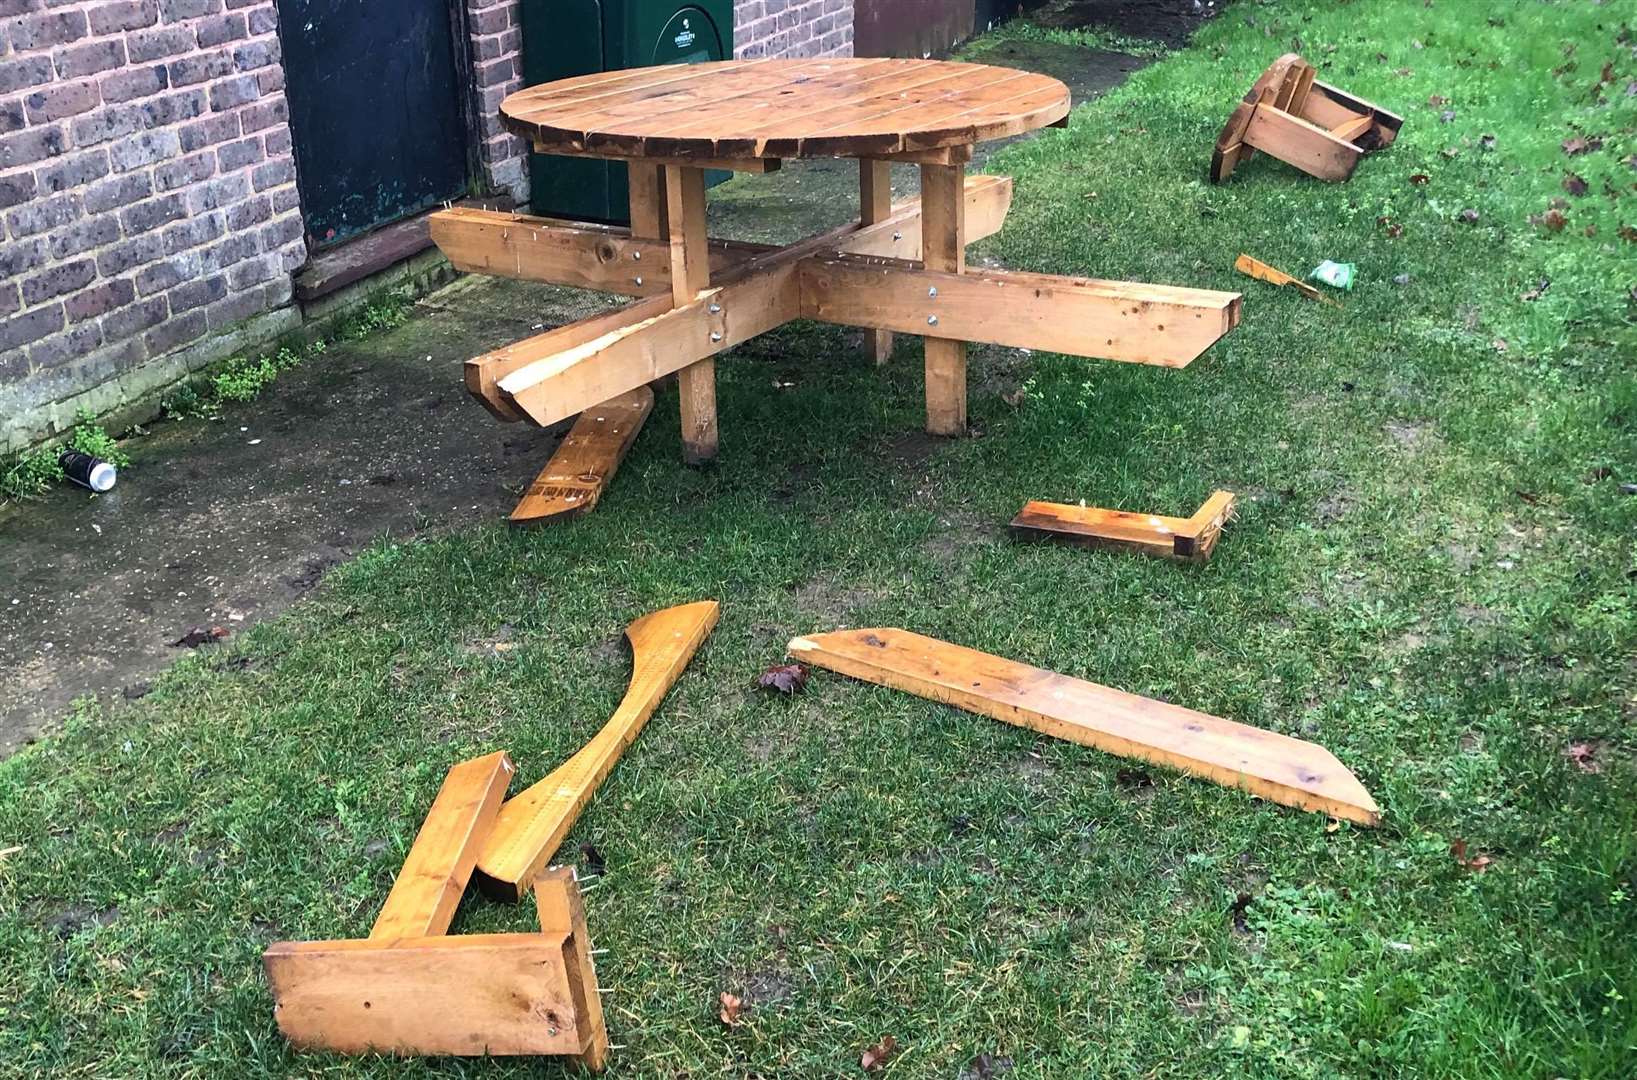 Benches were pulled apart by mindless vandals